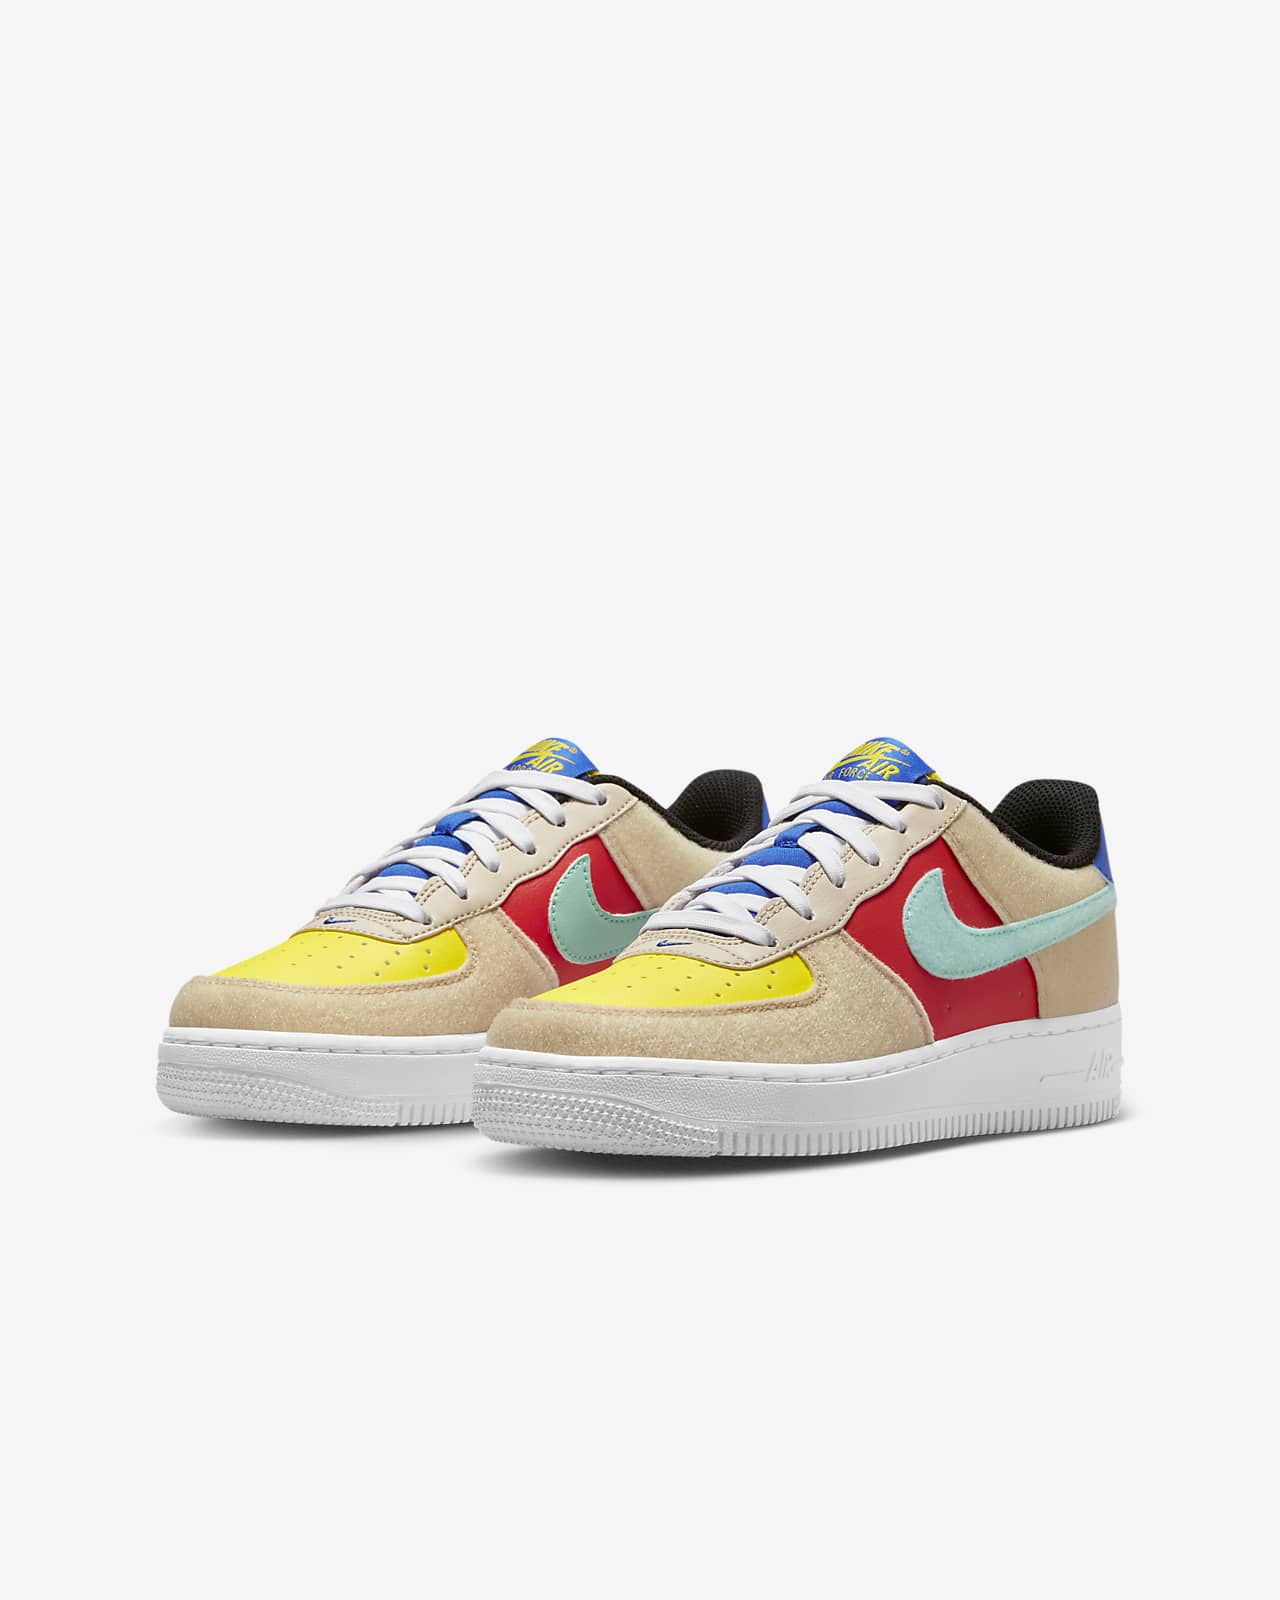 Nike Kids Air Force 1 LV8 Shoes 5.5